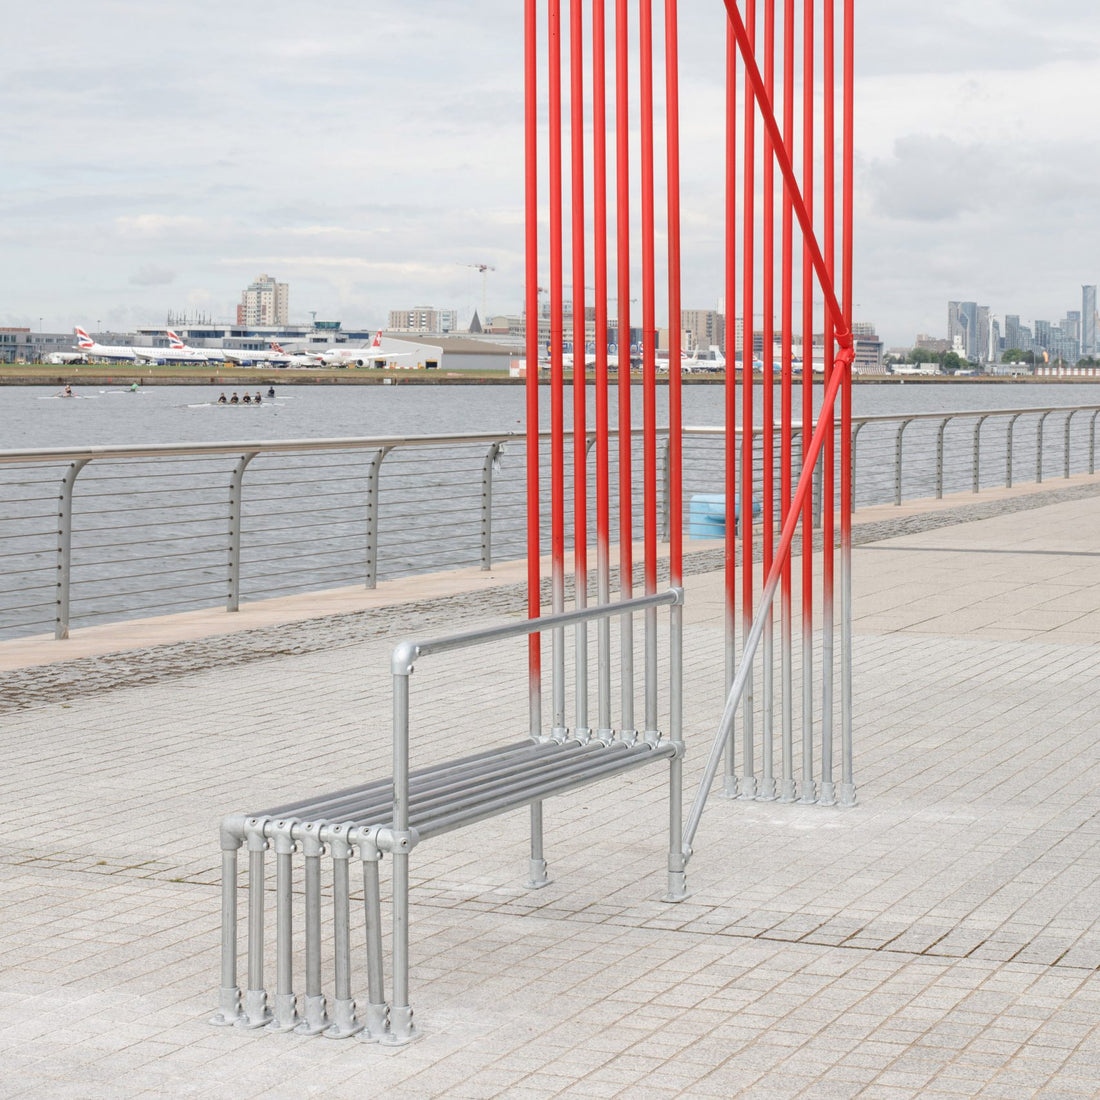 Pews and Perches enliven London’s Royal Docks for London Festival of Architecture